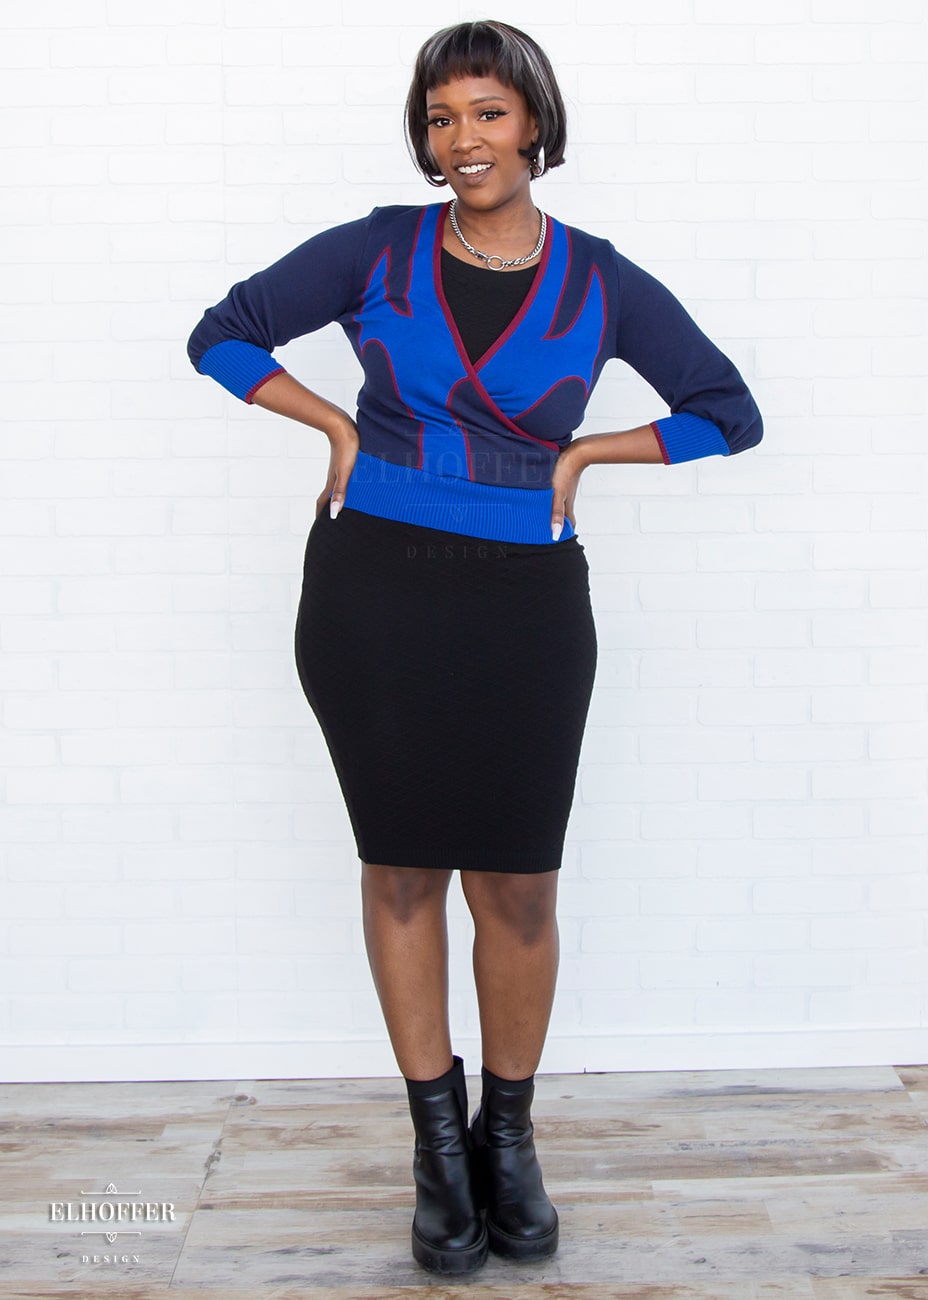 Lynsi, a medium dark skinned model with short black and white hair, is wearing a crossover knit crop top. The base is a dark blue, details are bright blue with a red outline and form almost a t shape in the middle of the crop. The cuffs and bottom are the same bright blue of the detail and the crossover is piped in the same red.